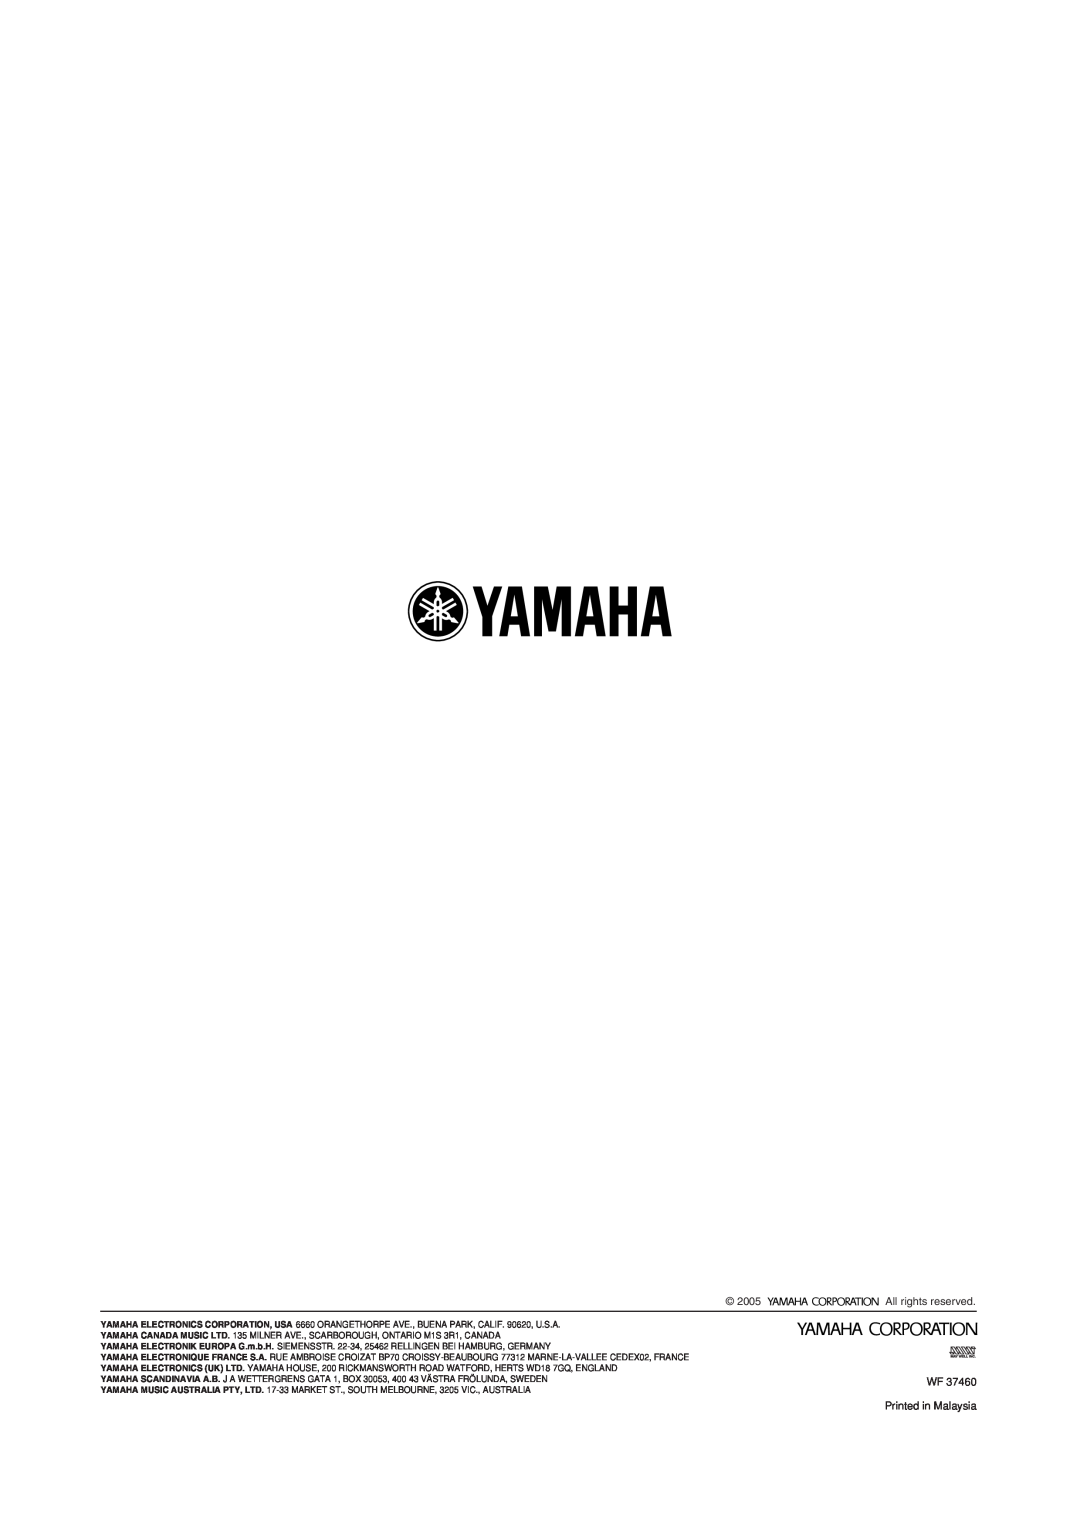 Yamaha MCX-2000 setup guide All rights reserved, WF 37460 Printed in Malaysia 